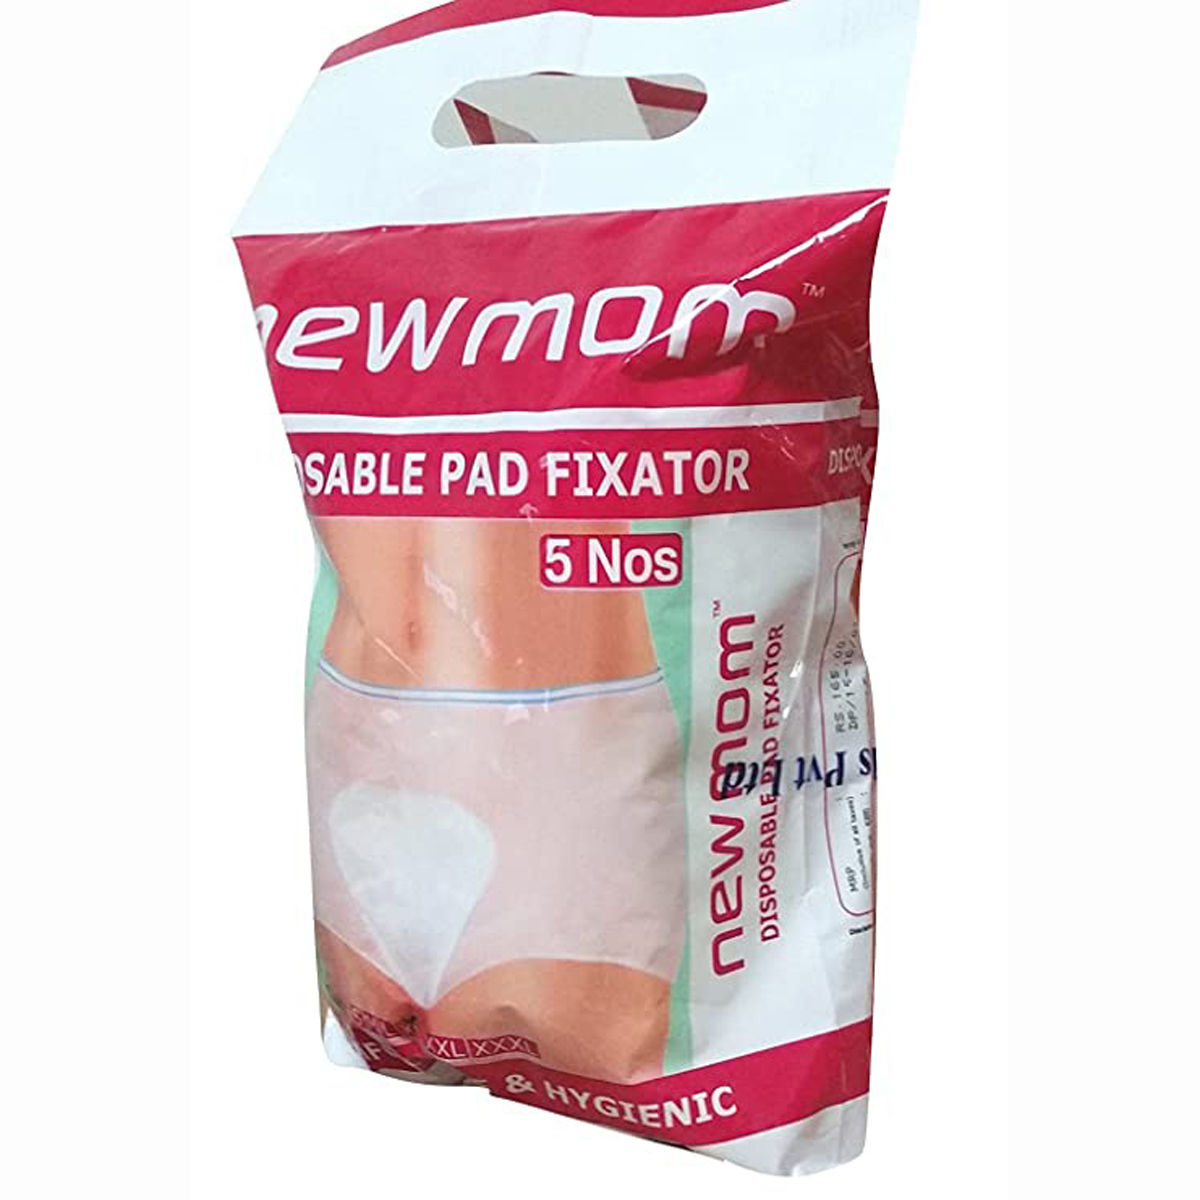 Dynamic Newmom Disposable Pad Fixator XL, 5 Count Price, Uses